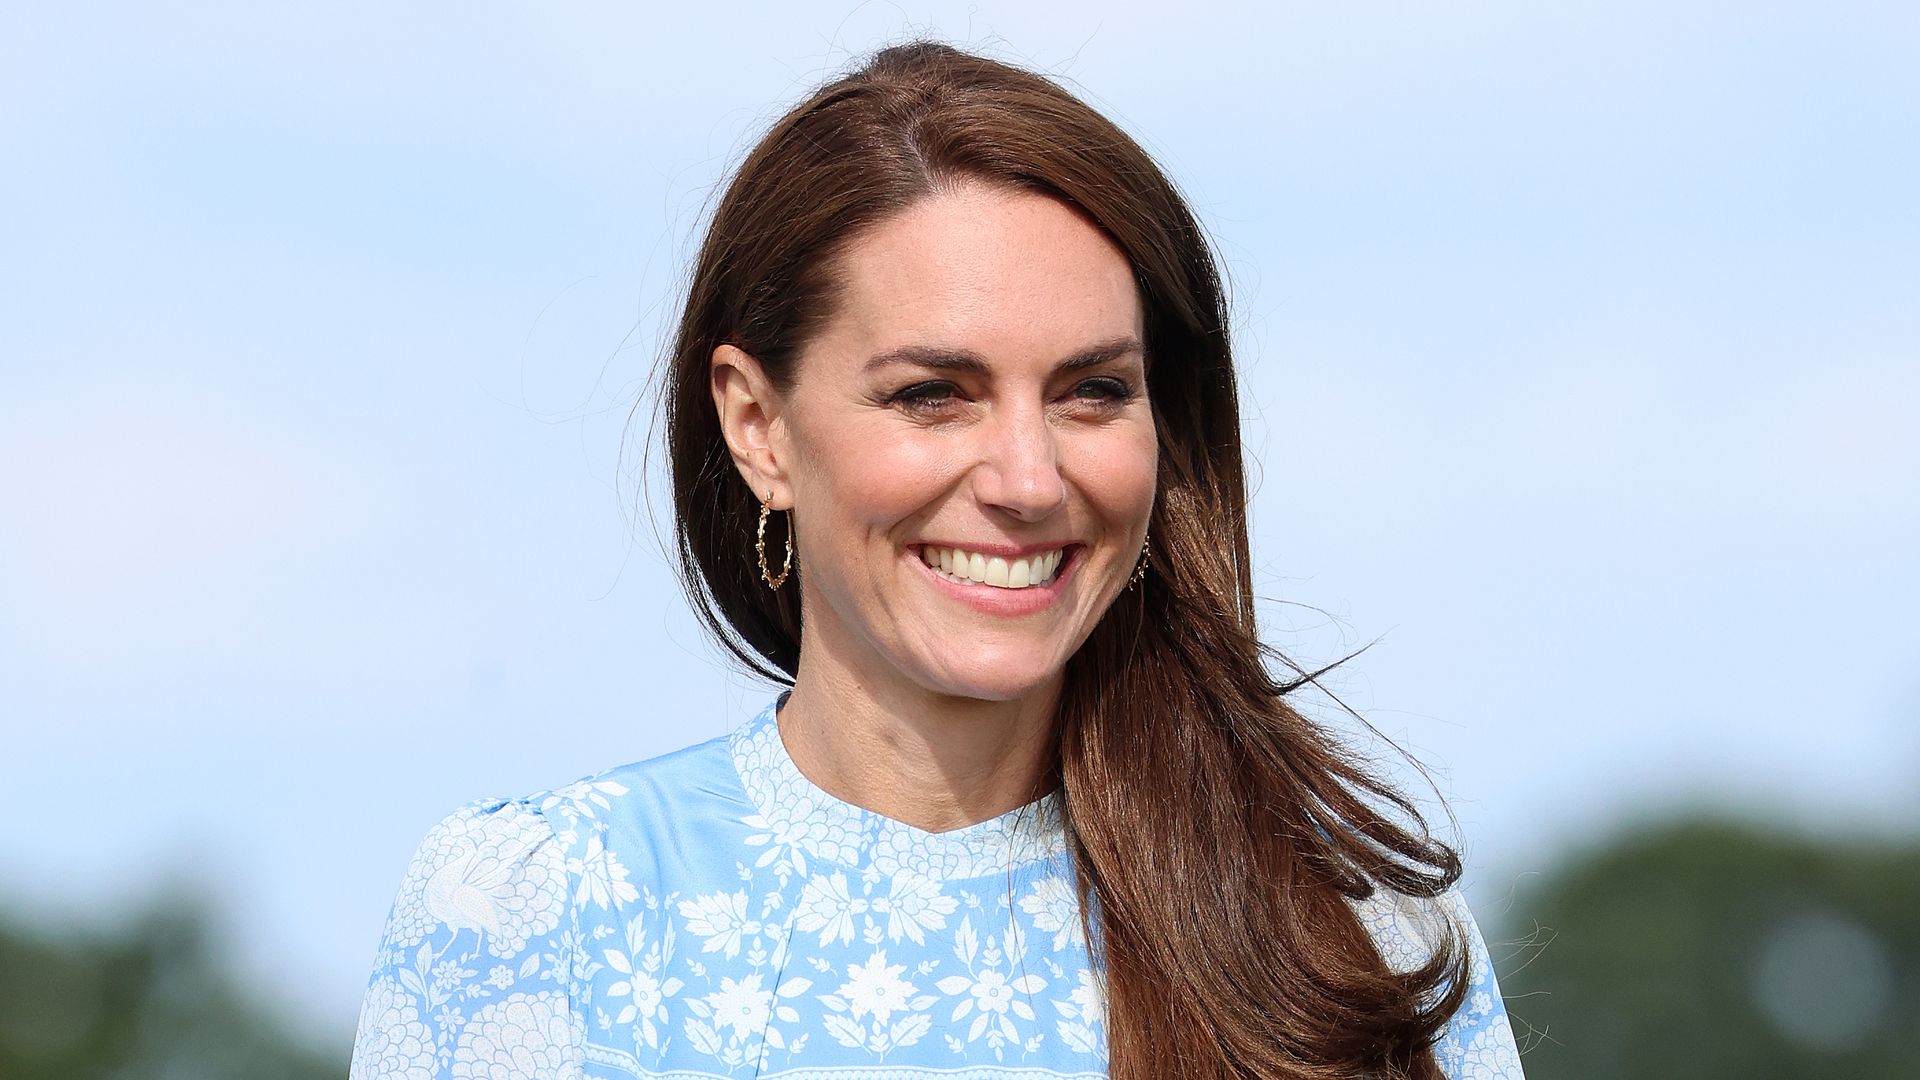 Kate Middleton smiling and wearing blue dress at charity polo match